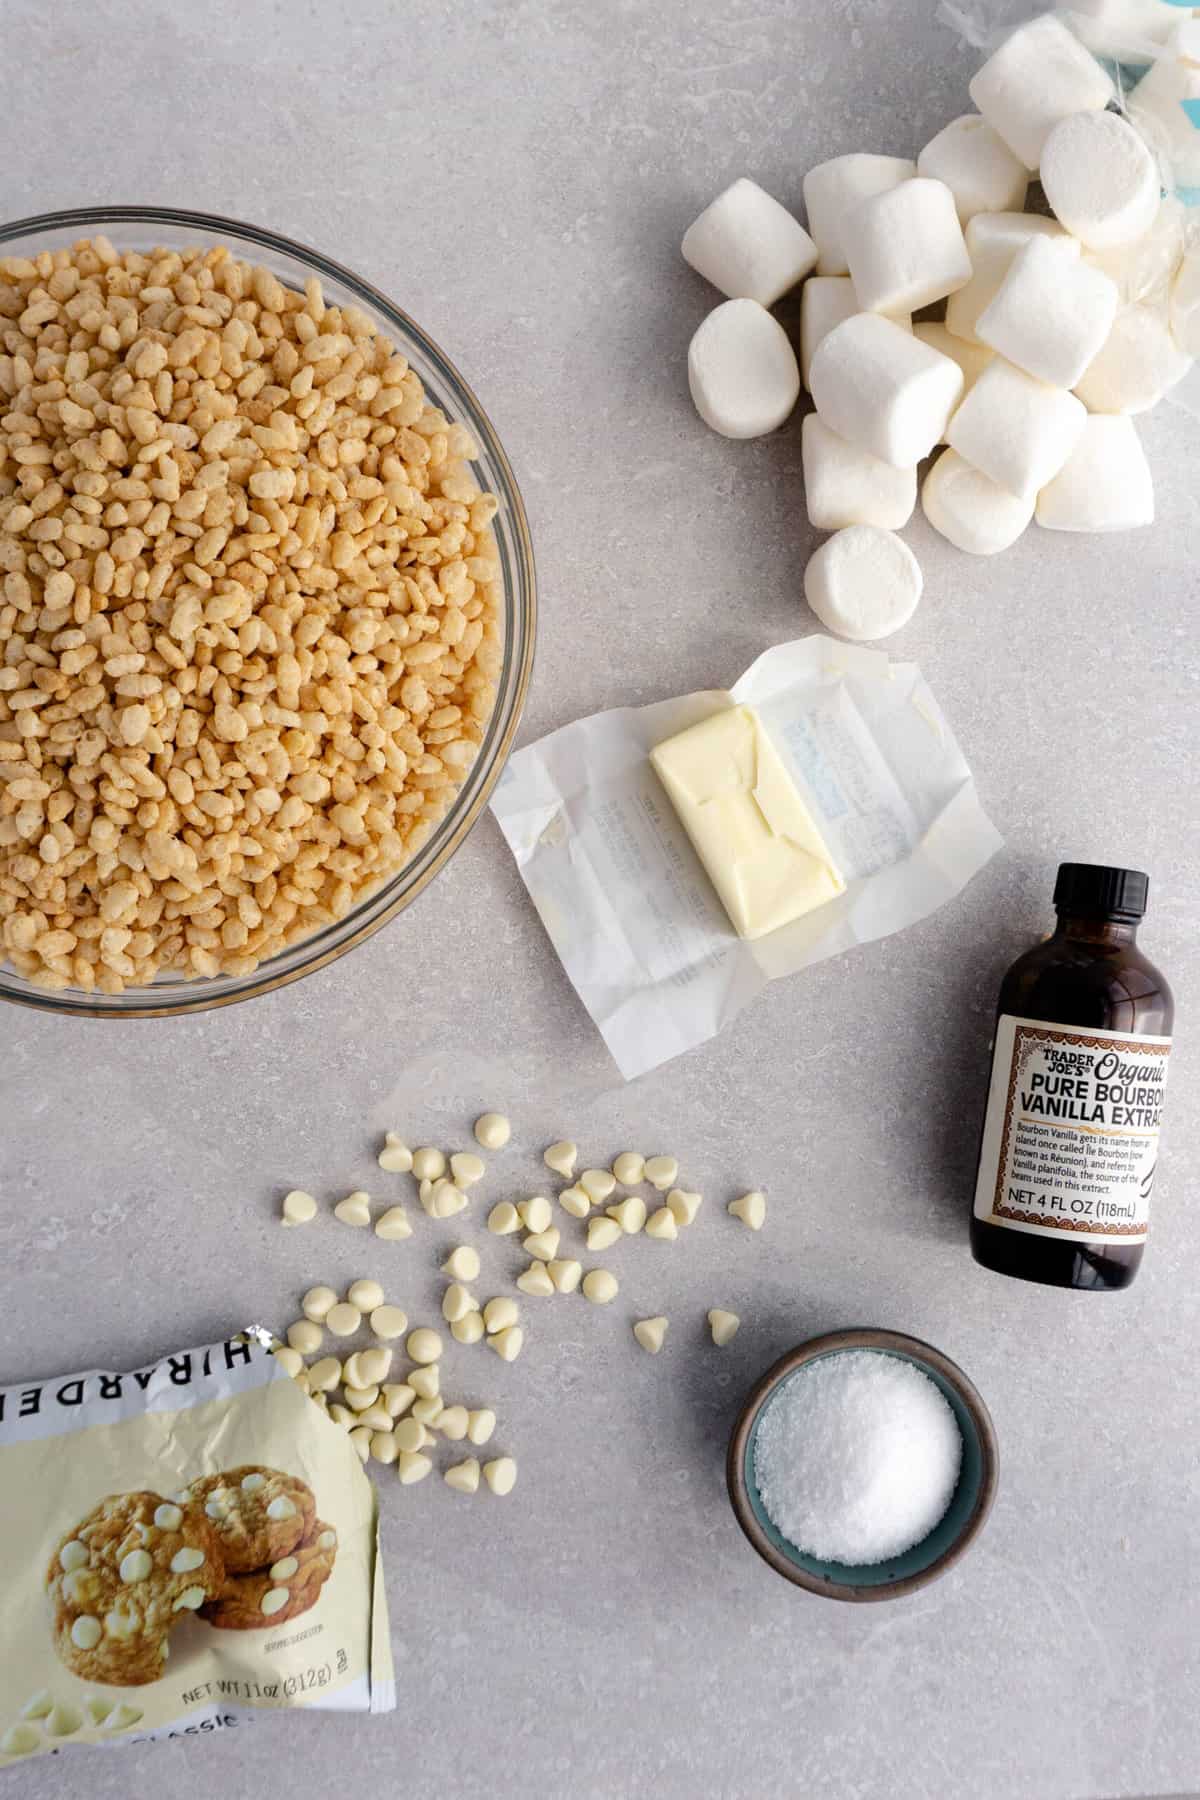 Ingredients to make copycat Disney rice krispie treats sit on a countertop ready to be used.